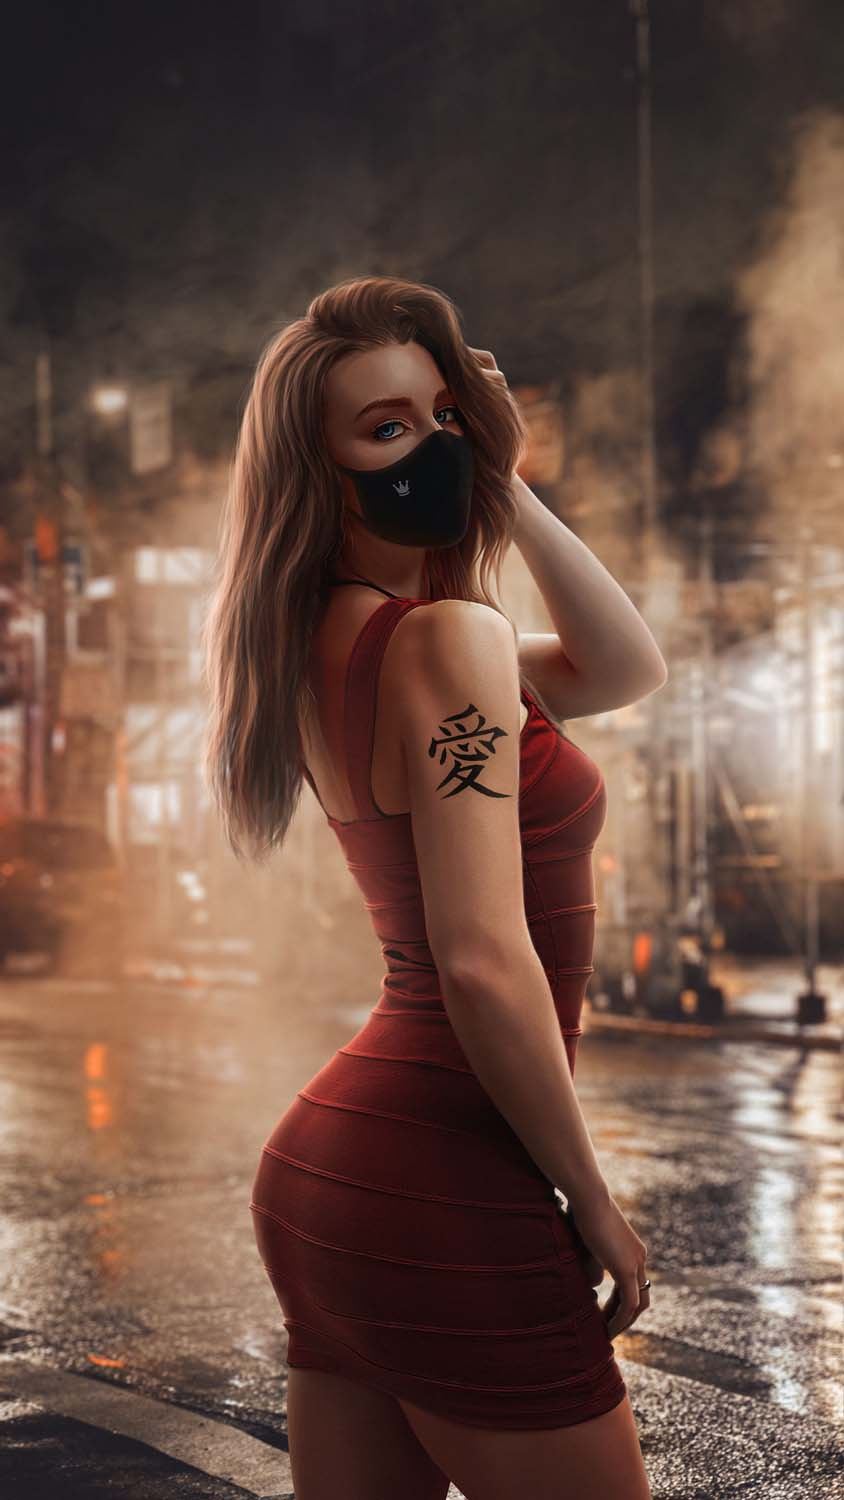 Girl With Tattoo IPhone Wallpaper HD  IPhone Wallpapers